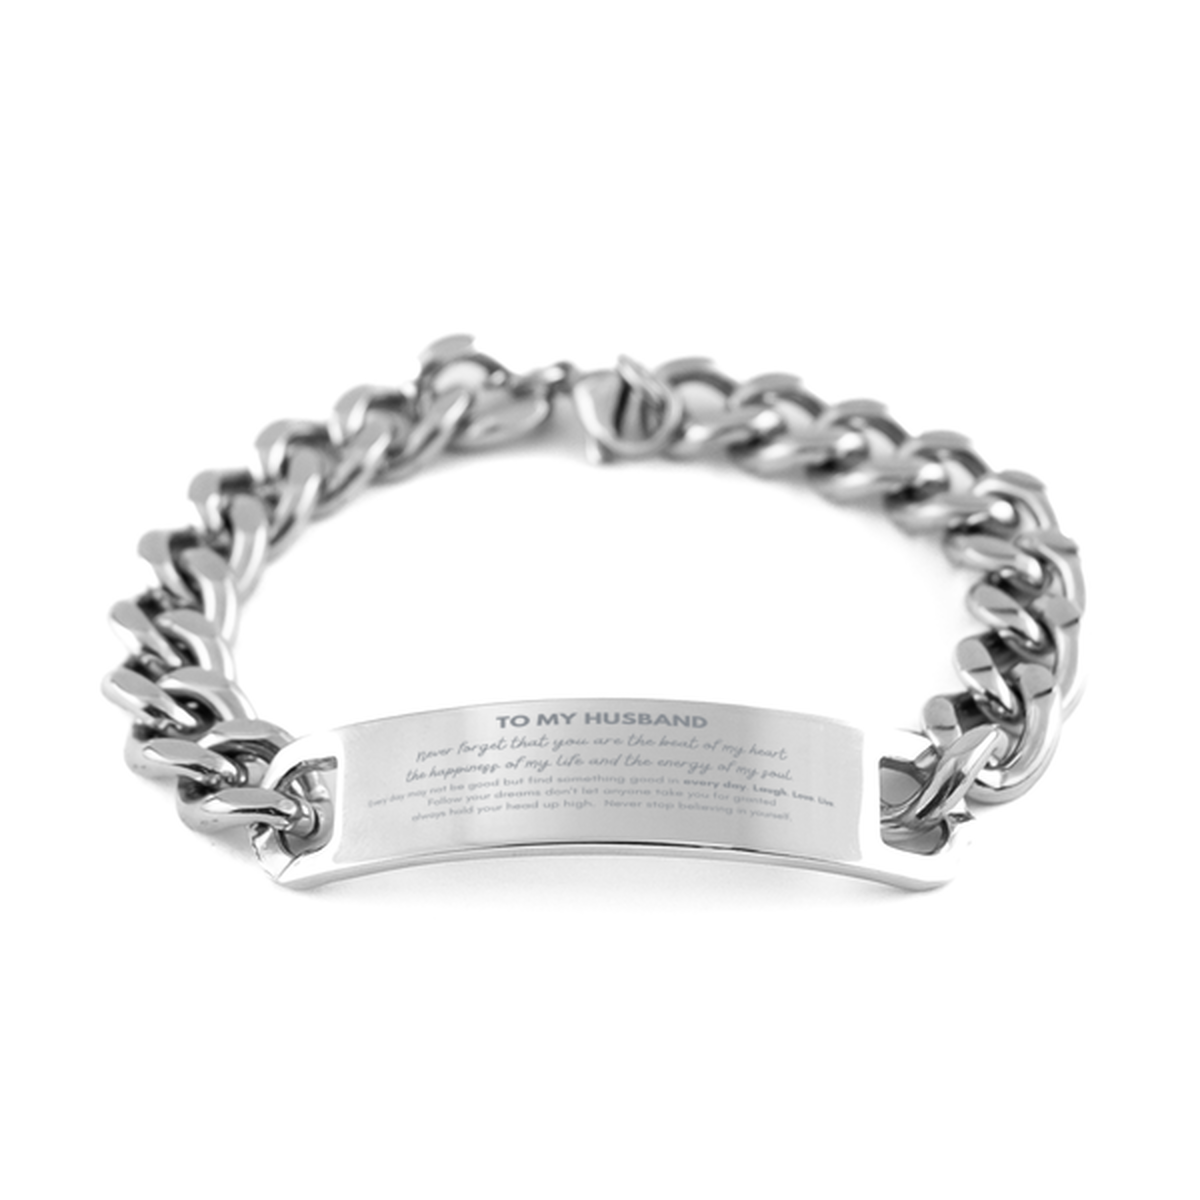 To My Husband Bracelet Gifts, Christmas Husband Cuban Chain Stainless Steel Bracelet Present, Birthday Unique Motivational For Husband, To My Husband Never forget that you are the beat of my heart the happiness of my life and the energy of my soul